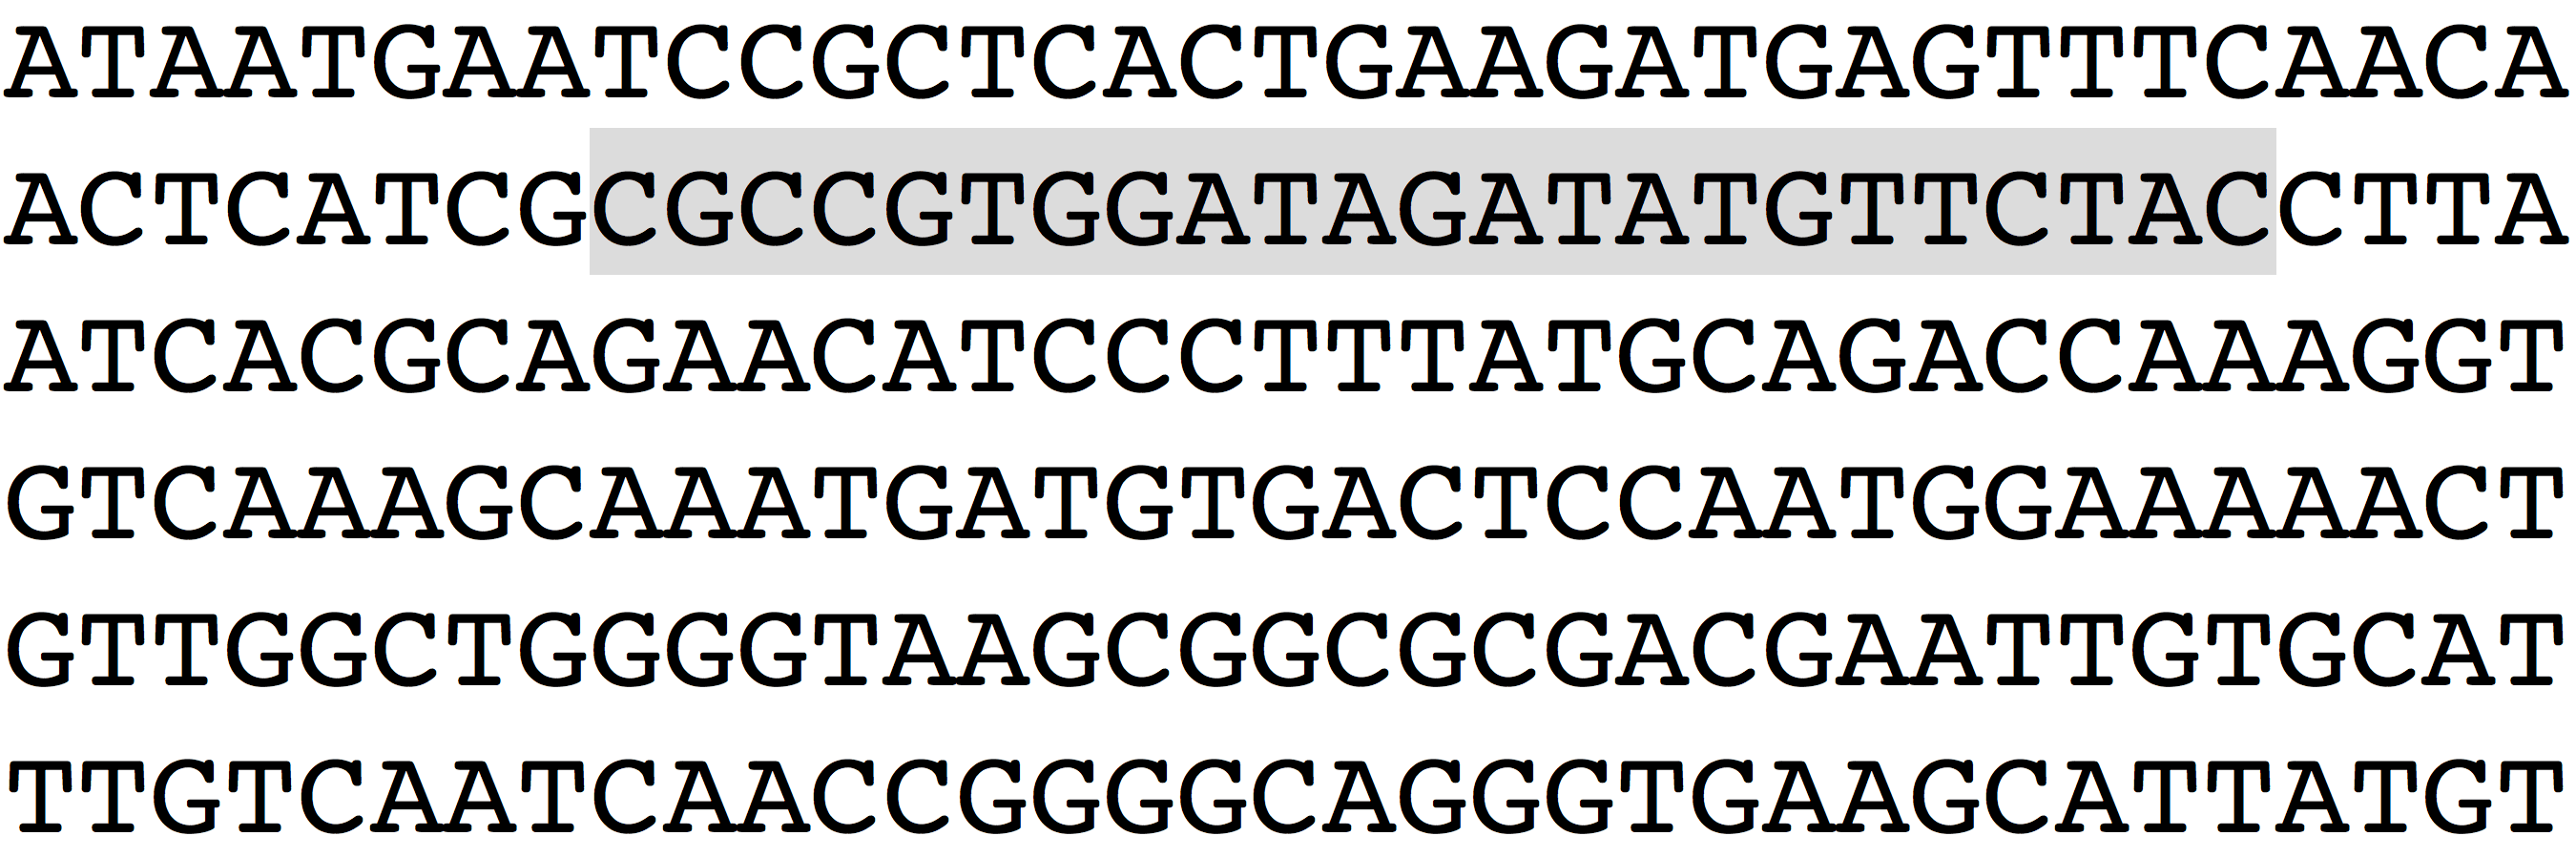 Sequence of DNA letters